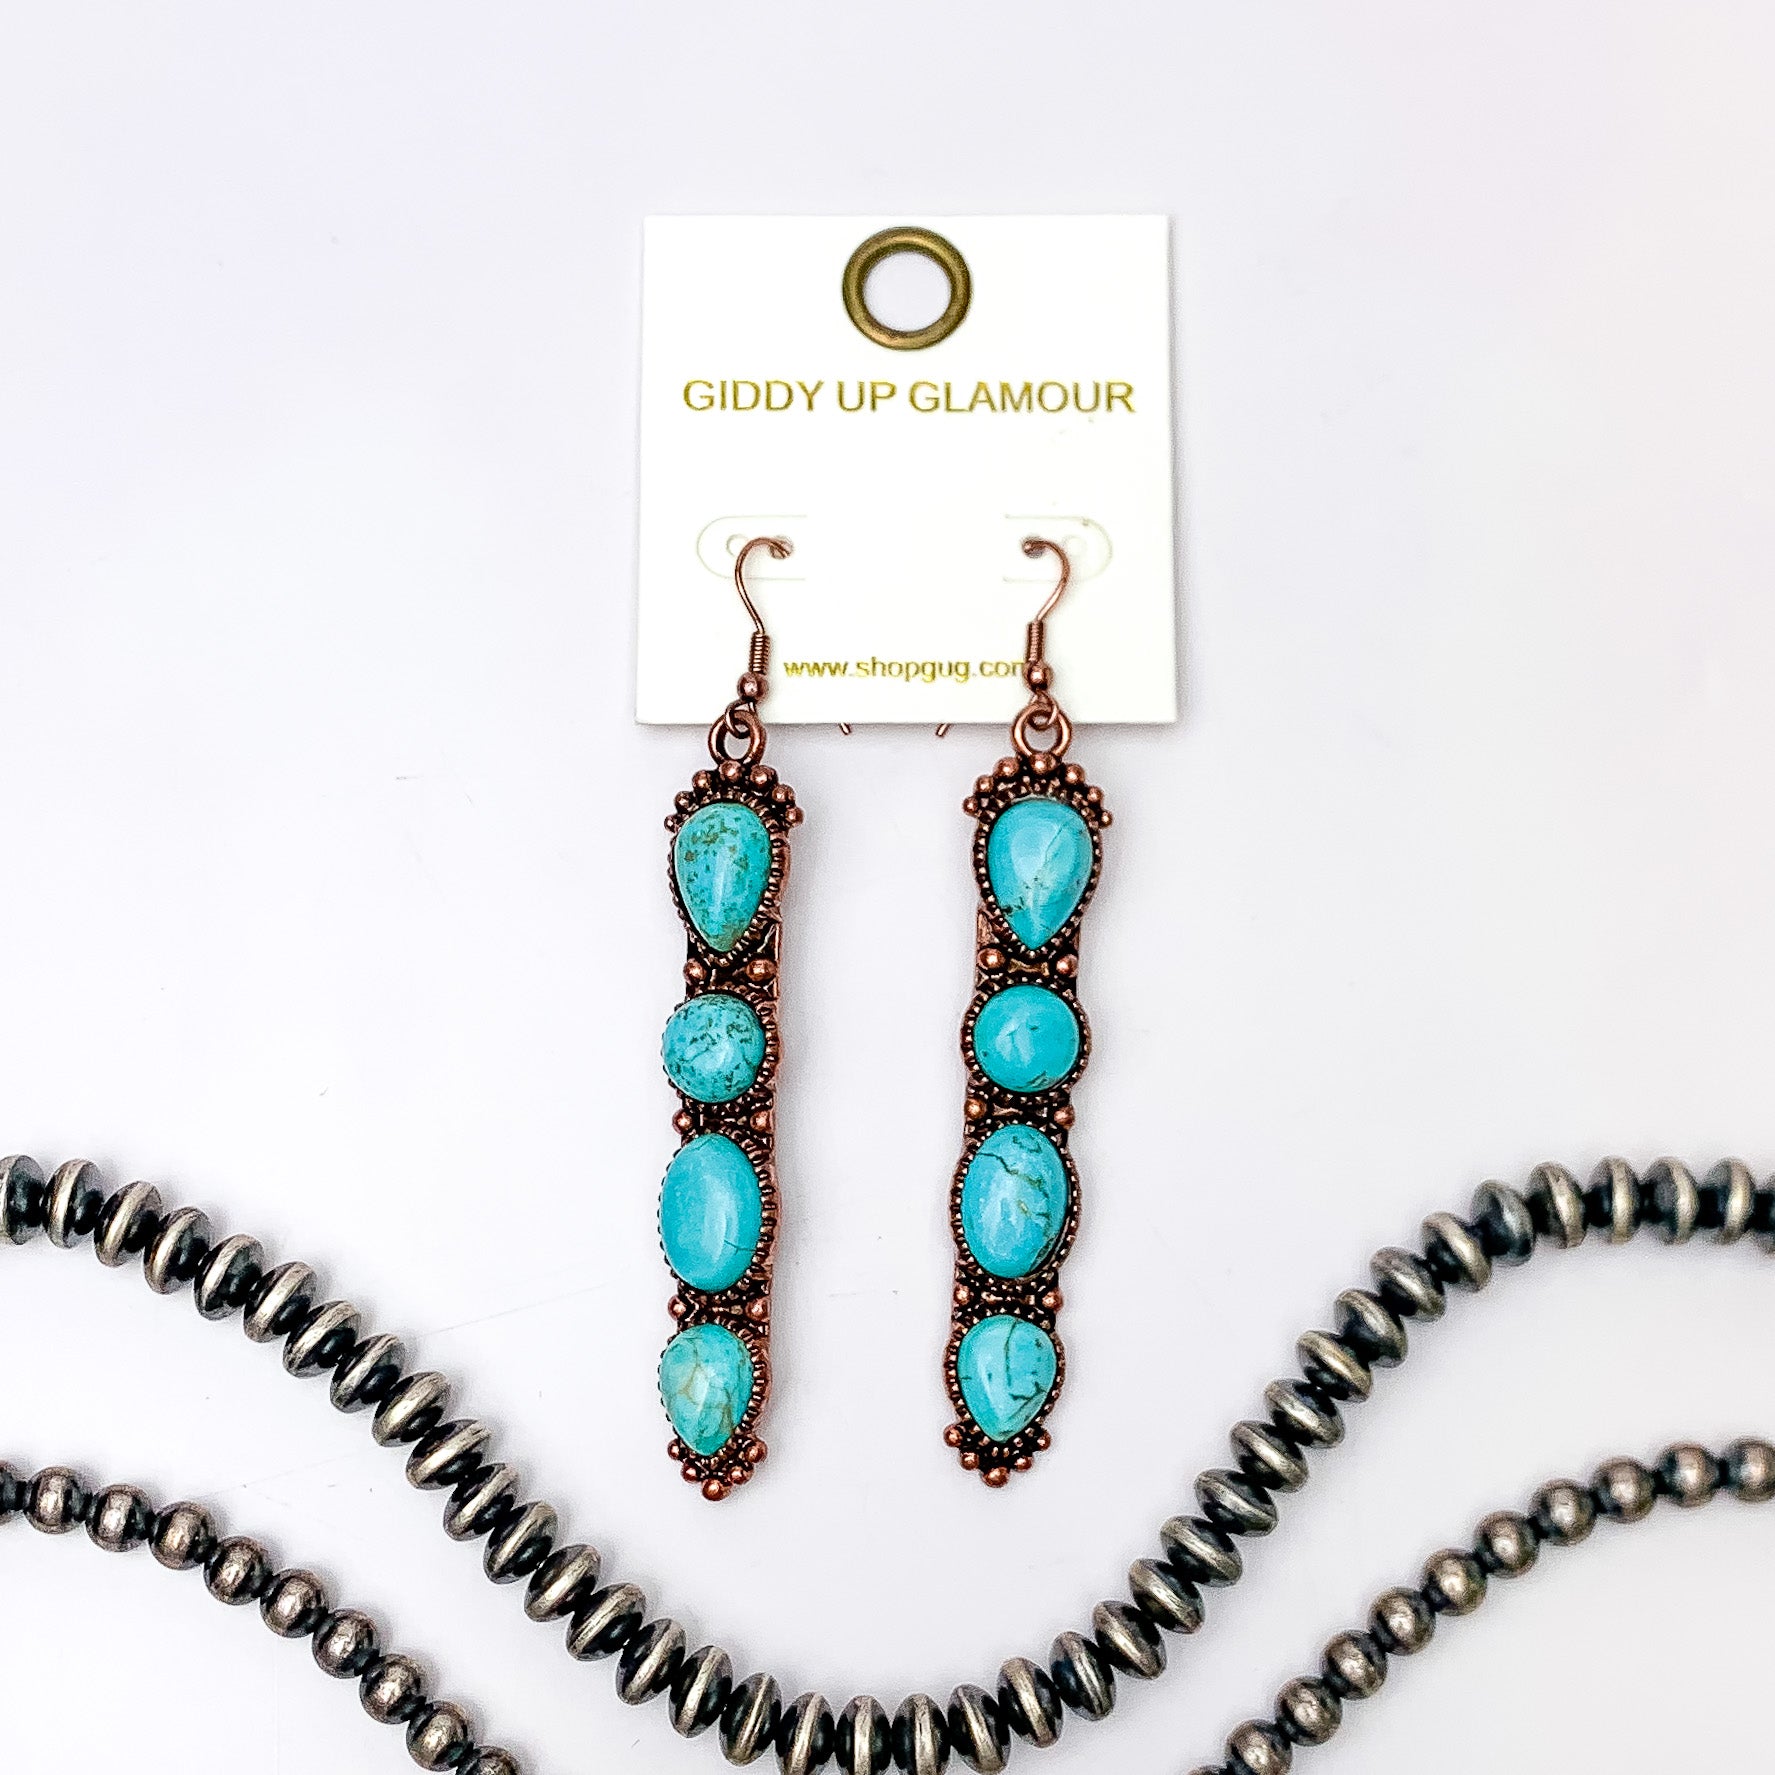 Copper fish hook earrings with a four, turquoise stone pendant. These earrings are pictured on a white background with silver beads at the bottom of the picture. 